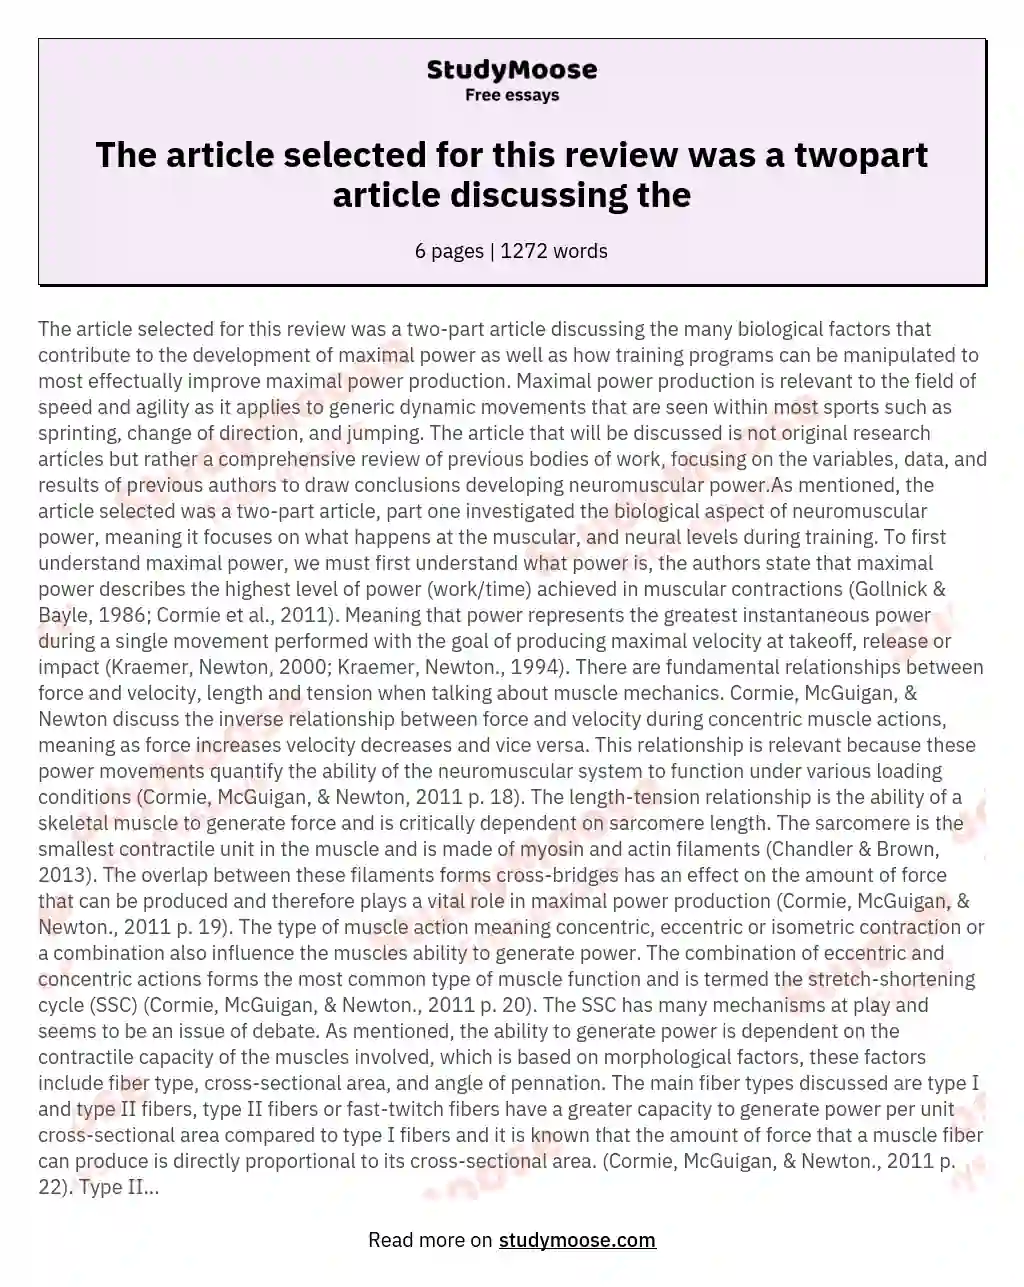 The article selected for this review was a twopart article discussing the